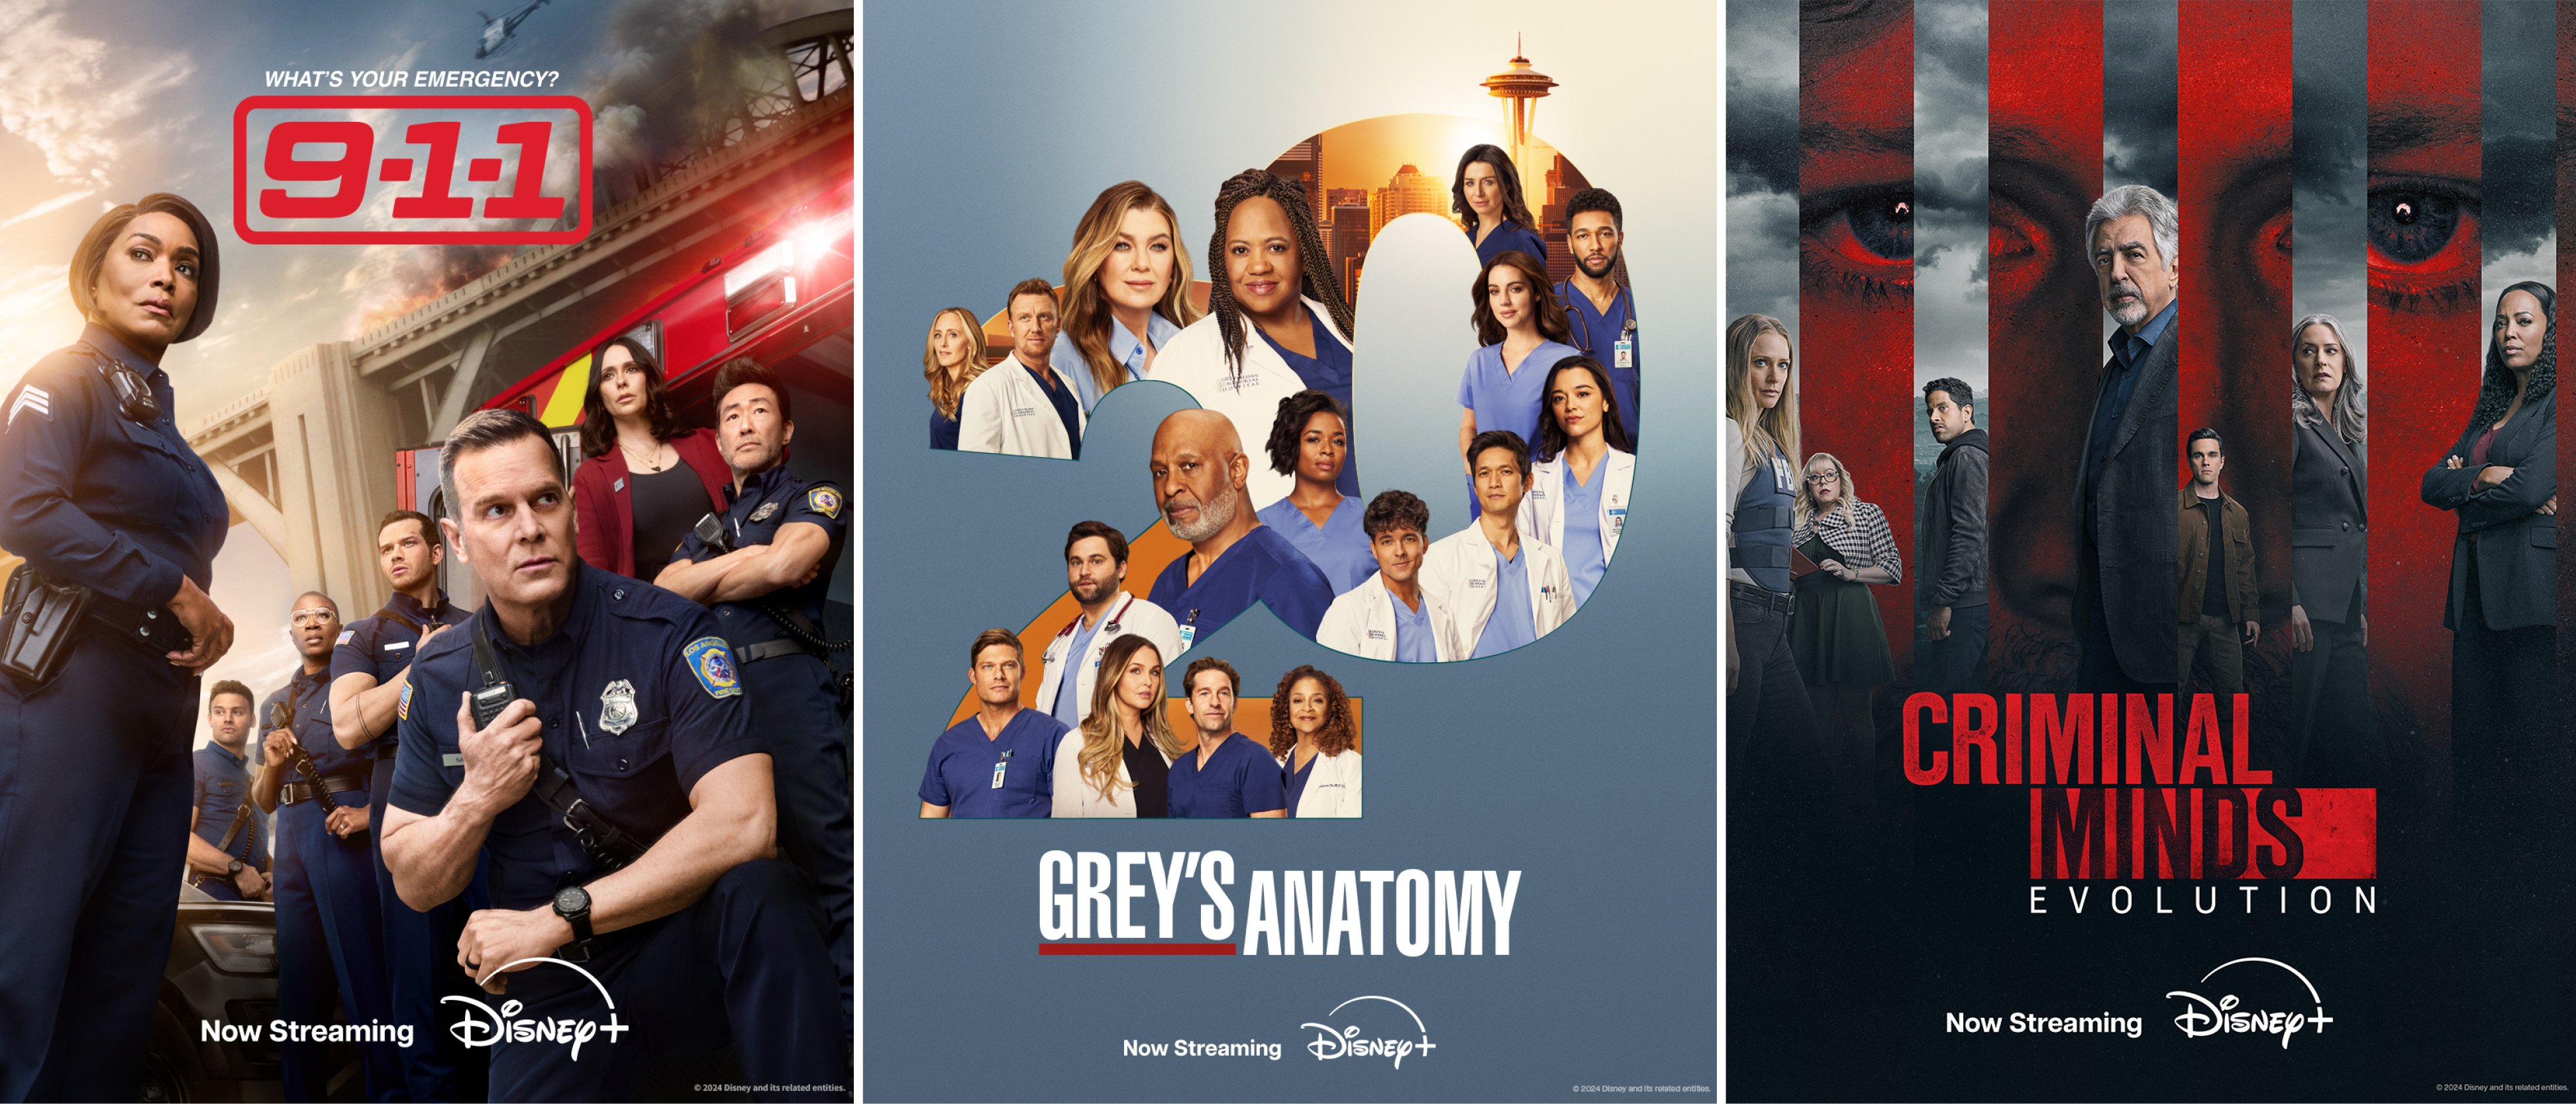 9-1-1, Grey’s Anatomy and Criminal Minds: Evolution – Join your favourite teams from these procedural dramas as they head back into action.